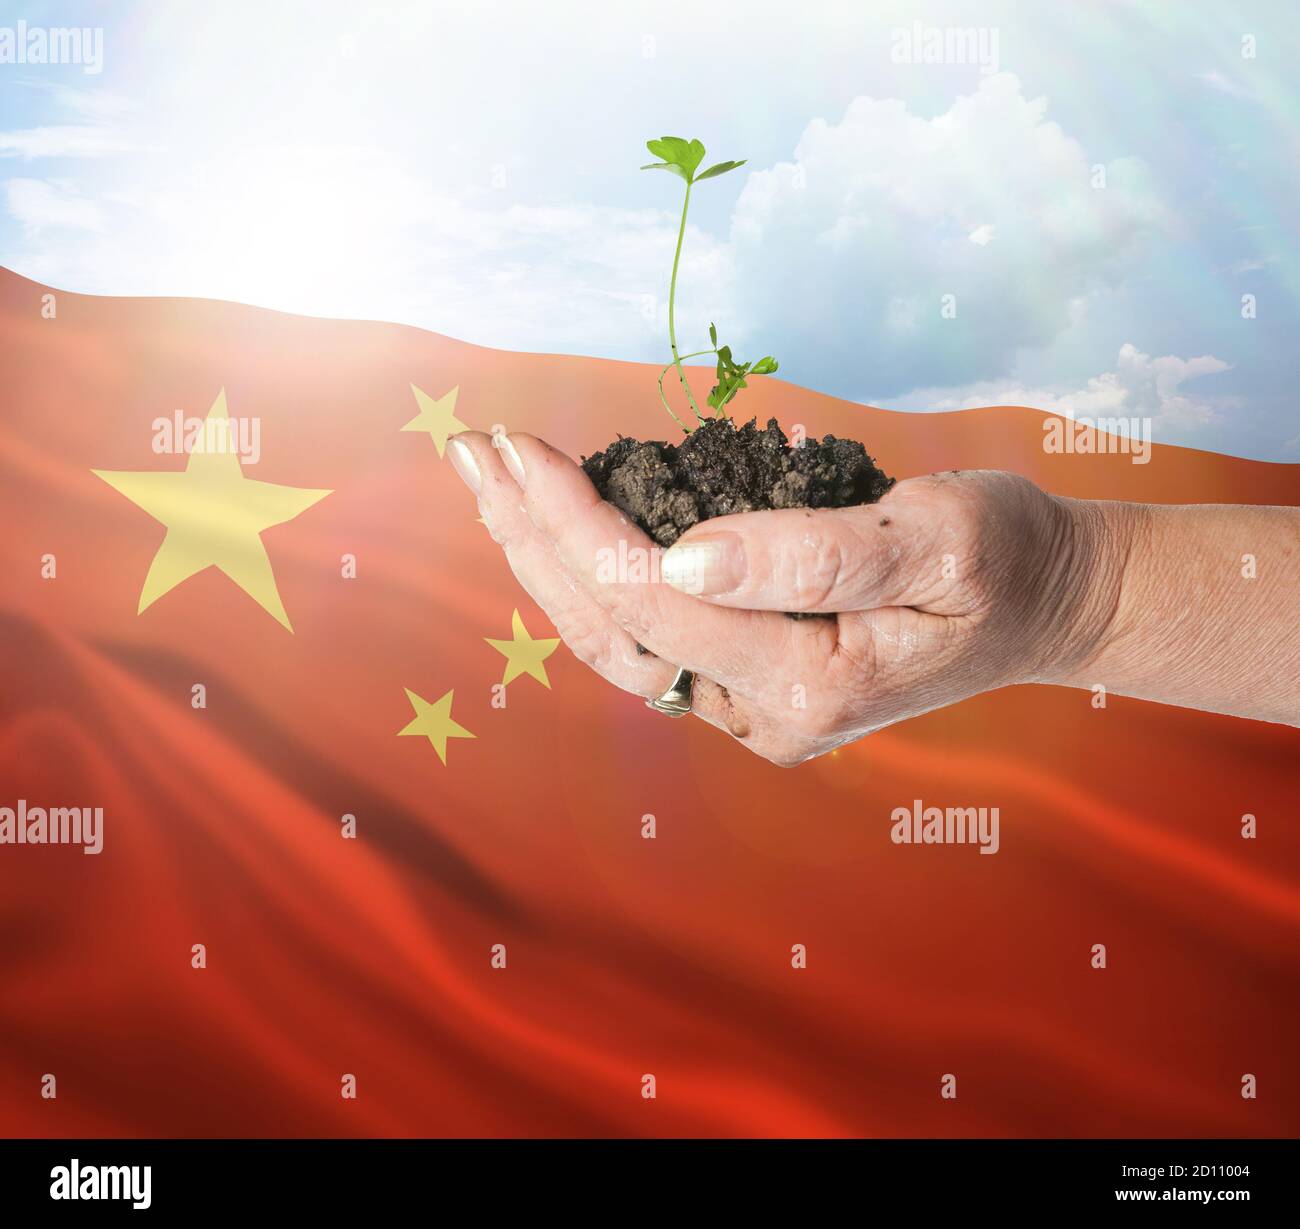 Peoples Republic of China growth and new beginning. Green renewable energy and ecology concept. Hand holding young plant. Stock Photo